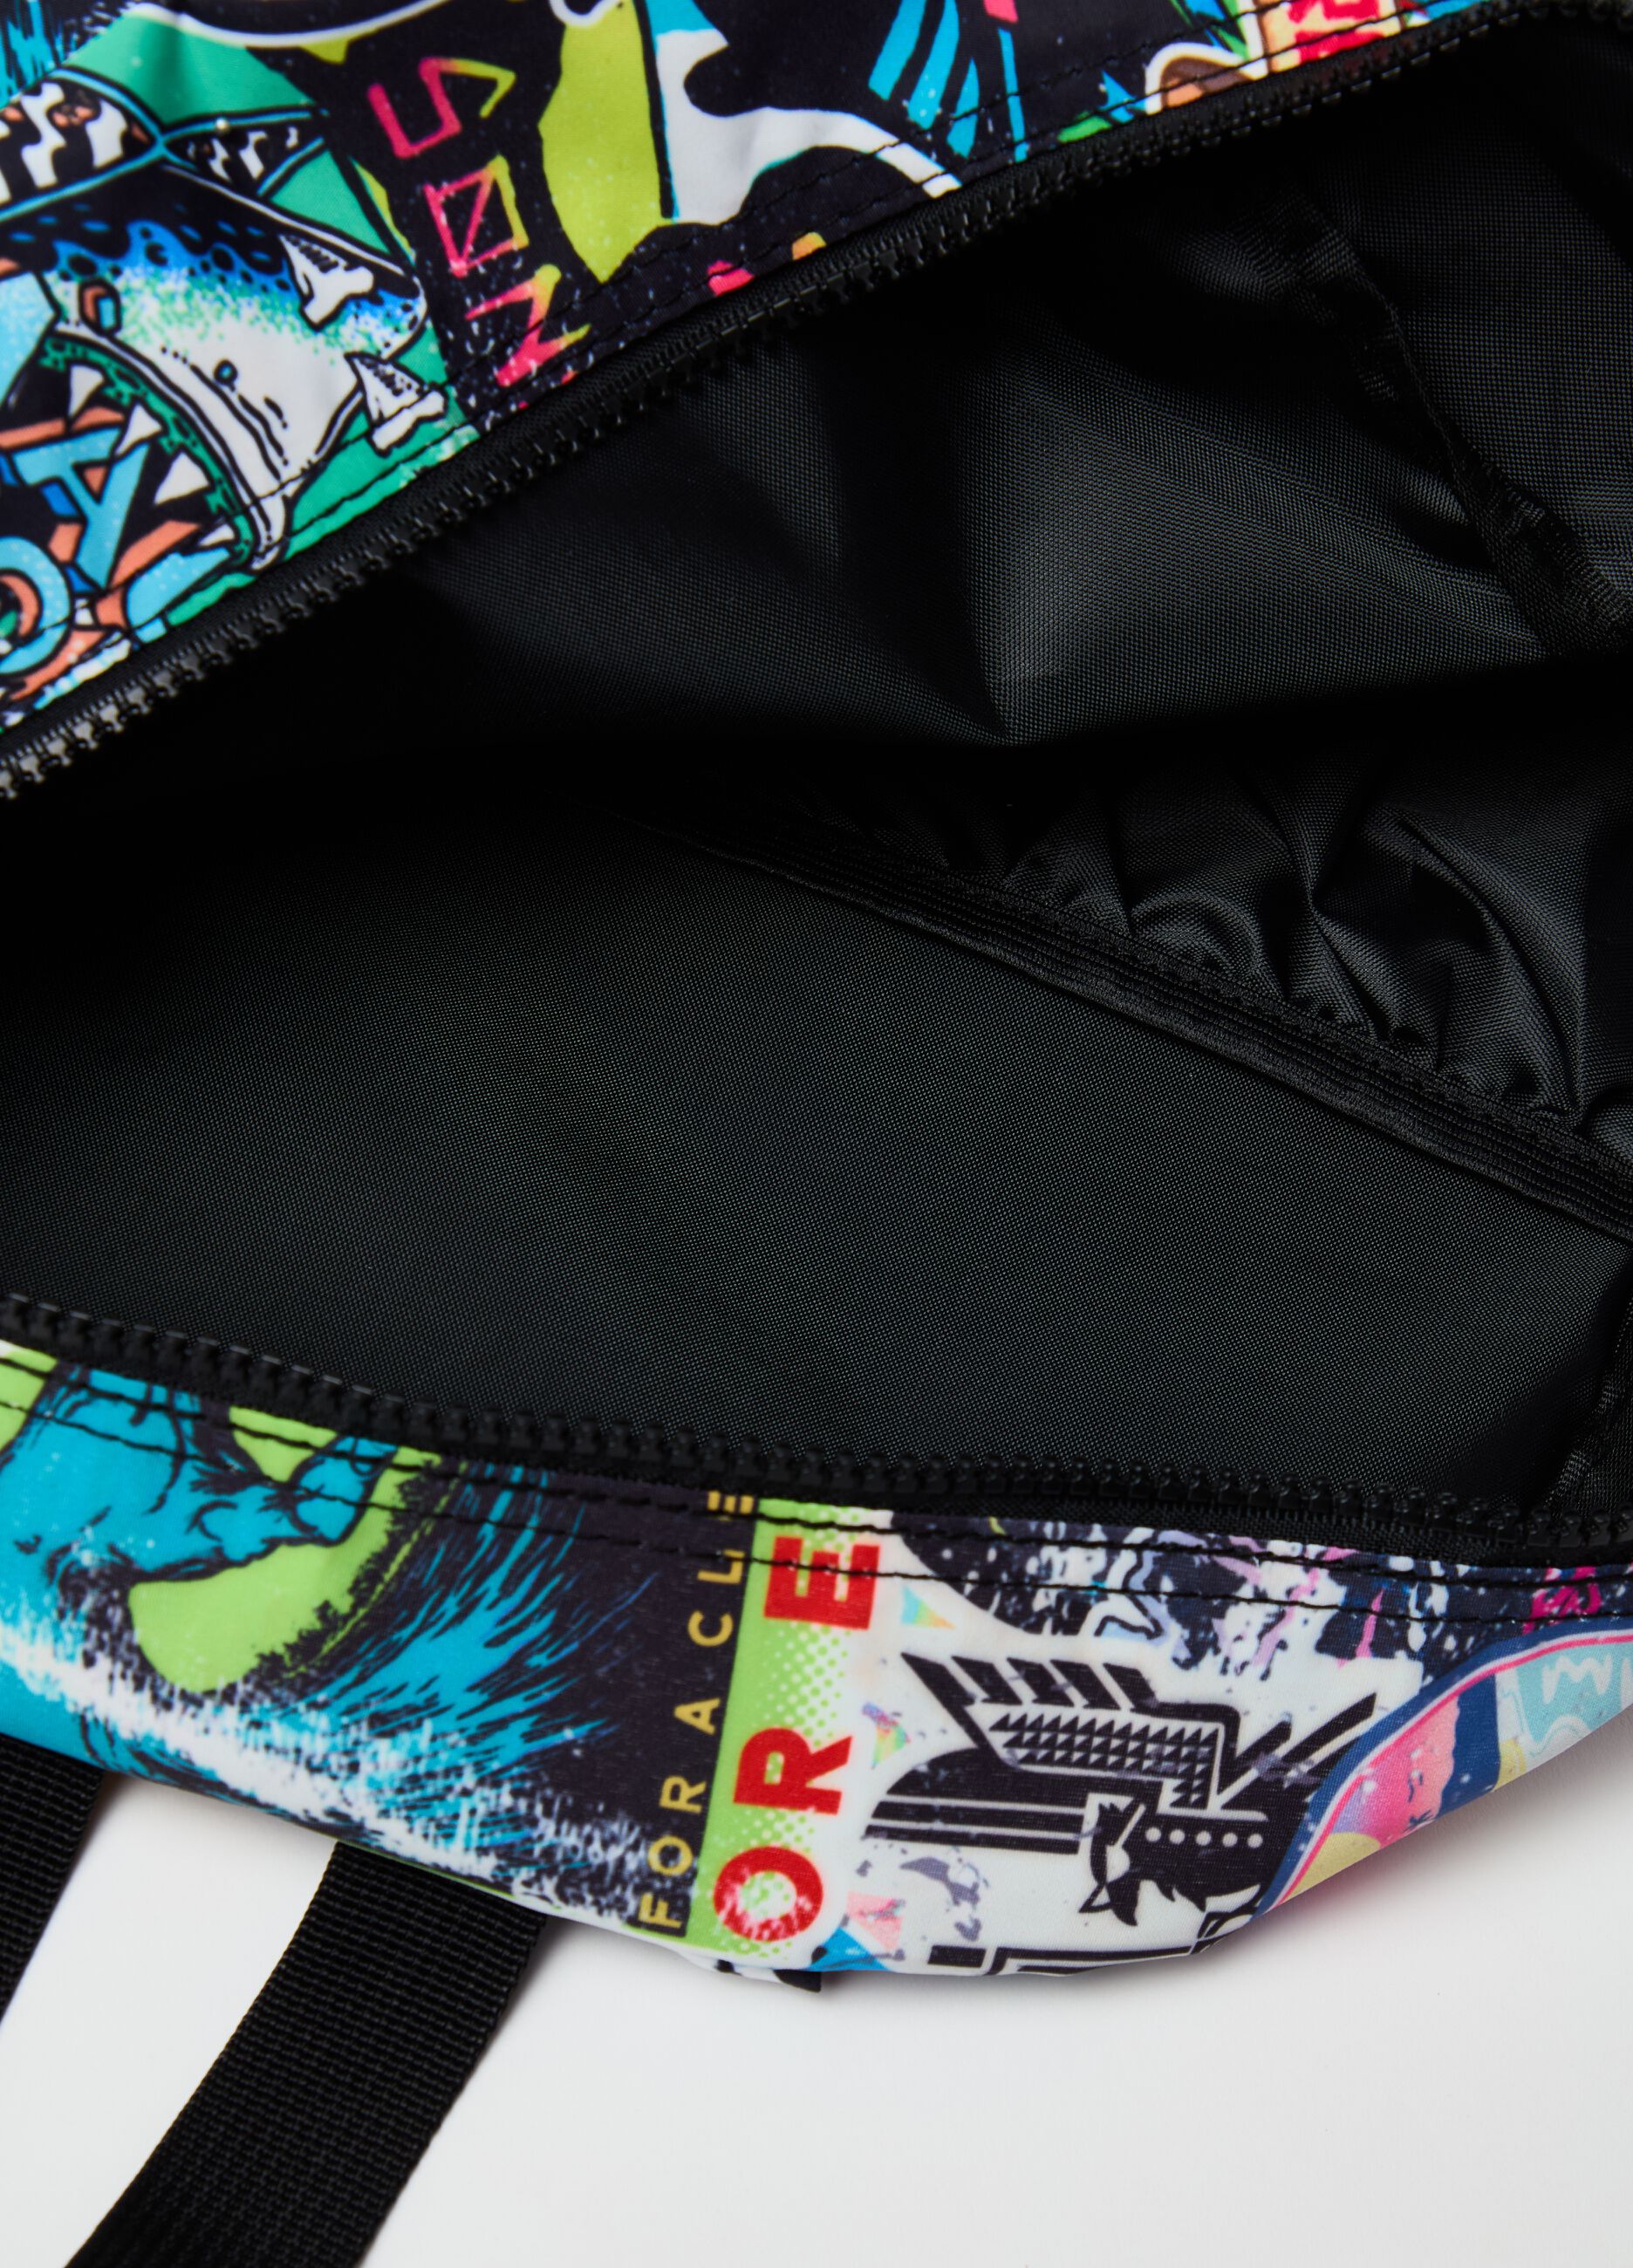 Oval backpack with graffiti print